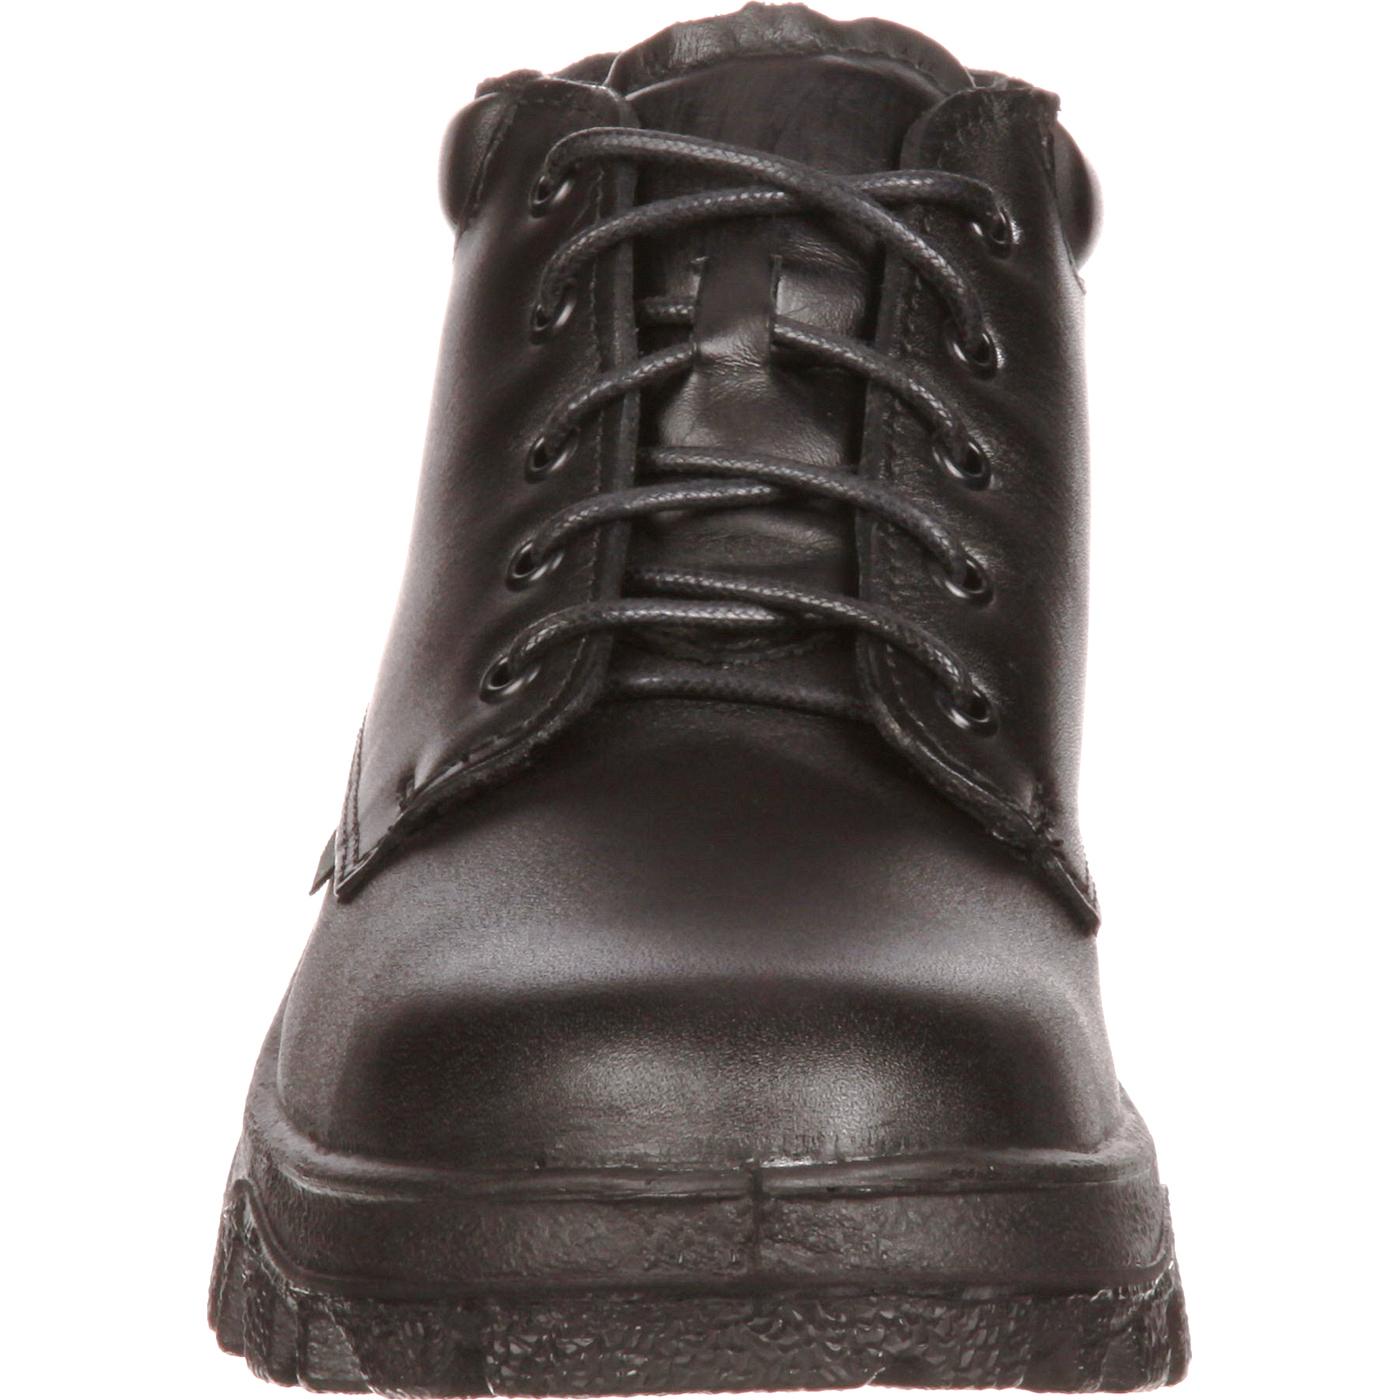 Rocky Mens Tmc Duty Pt Chk Casual Boots Boots - - image 3 of 7